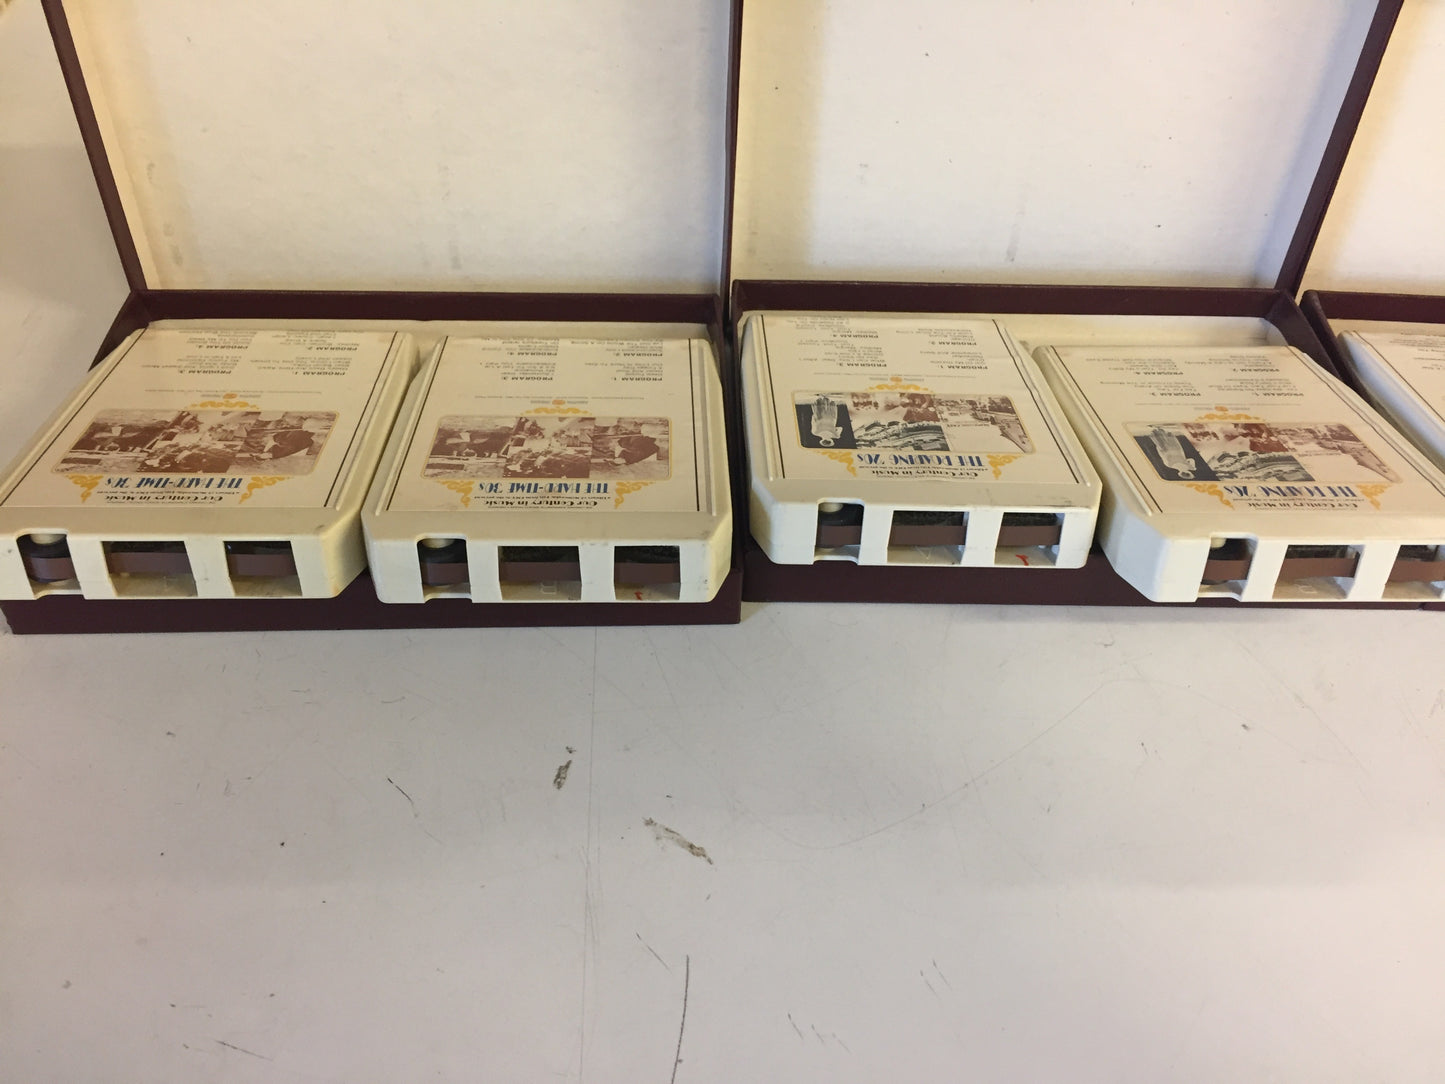 Vintage 1970's OUR CENTURY IN MUSIC 8-Track Sets 3 Sets in Lot